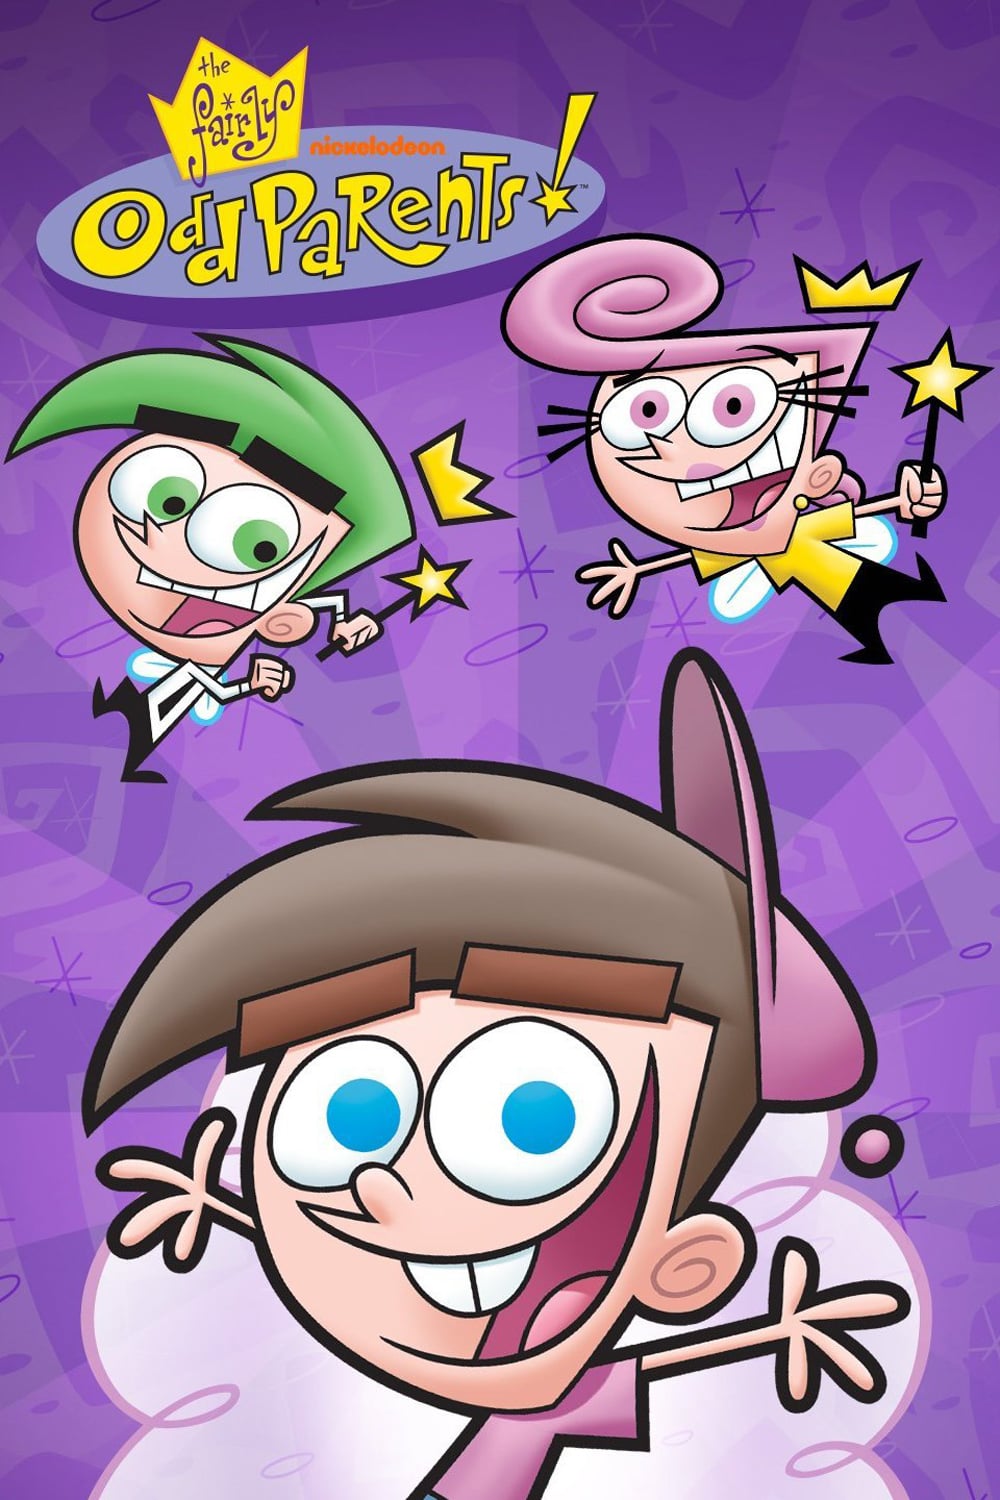 The Fairly Oddparents Final Episode